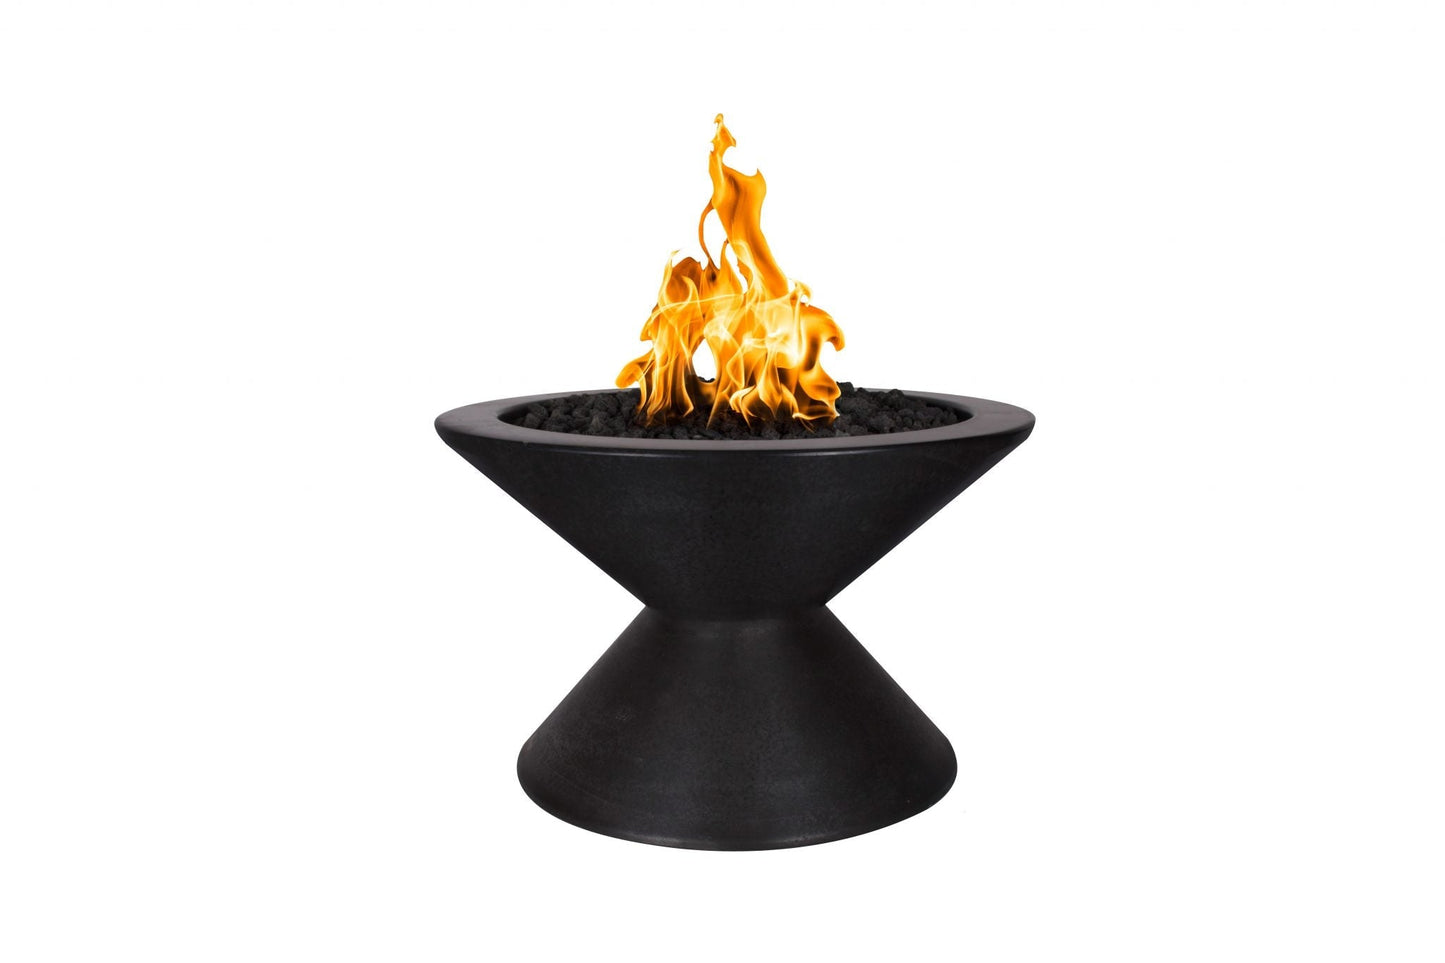 The Outdoor Plus Round Lucia 31" Vanilla GFRC Concrete Liquid Propane Fire Pit with 110V Electronic Ignition